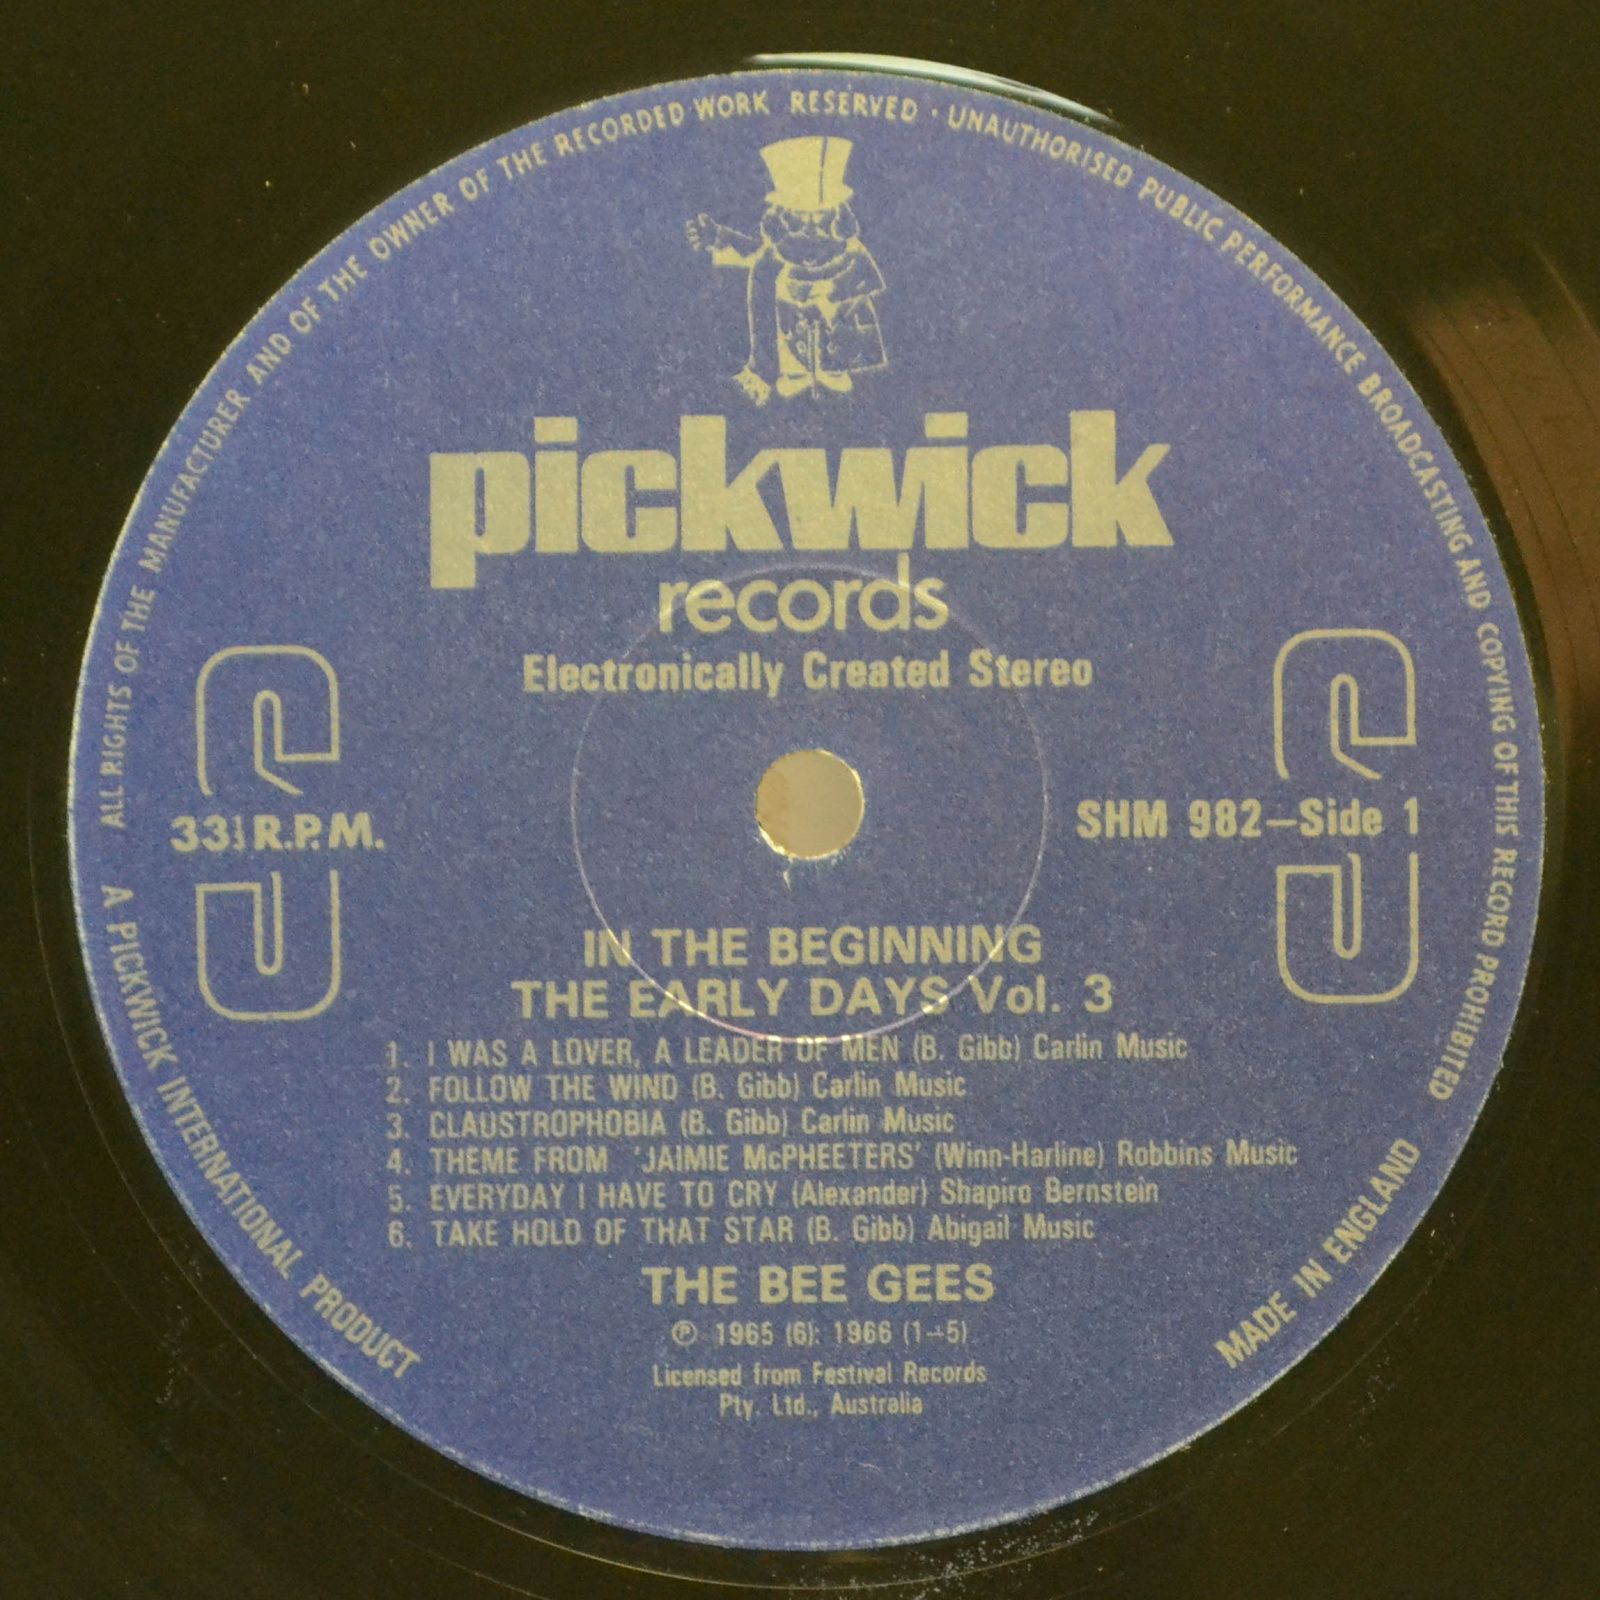 Bee Gees — In The Beginning - The Early Days Vol. 3 (UK), 1978